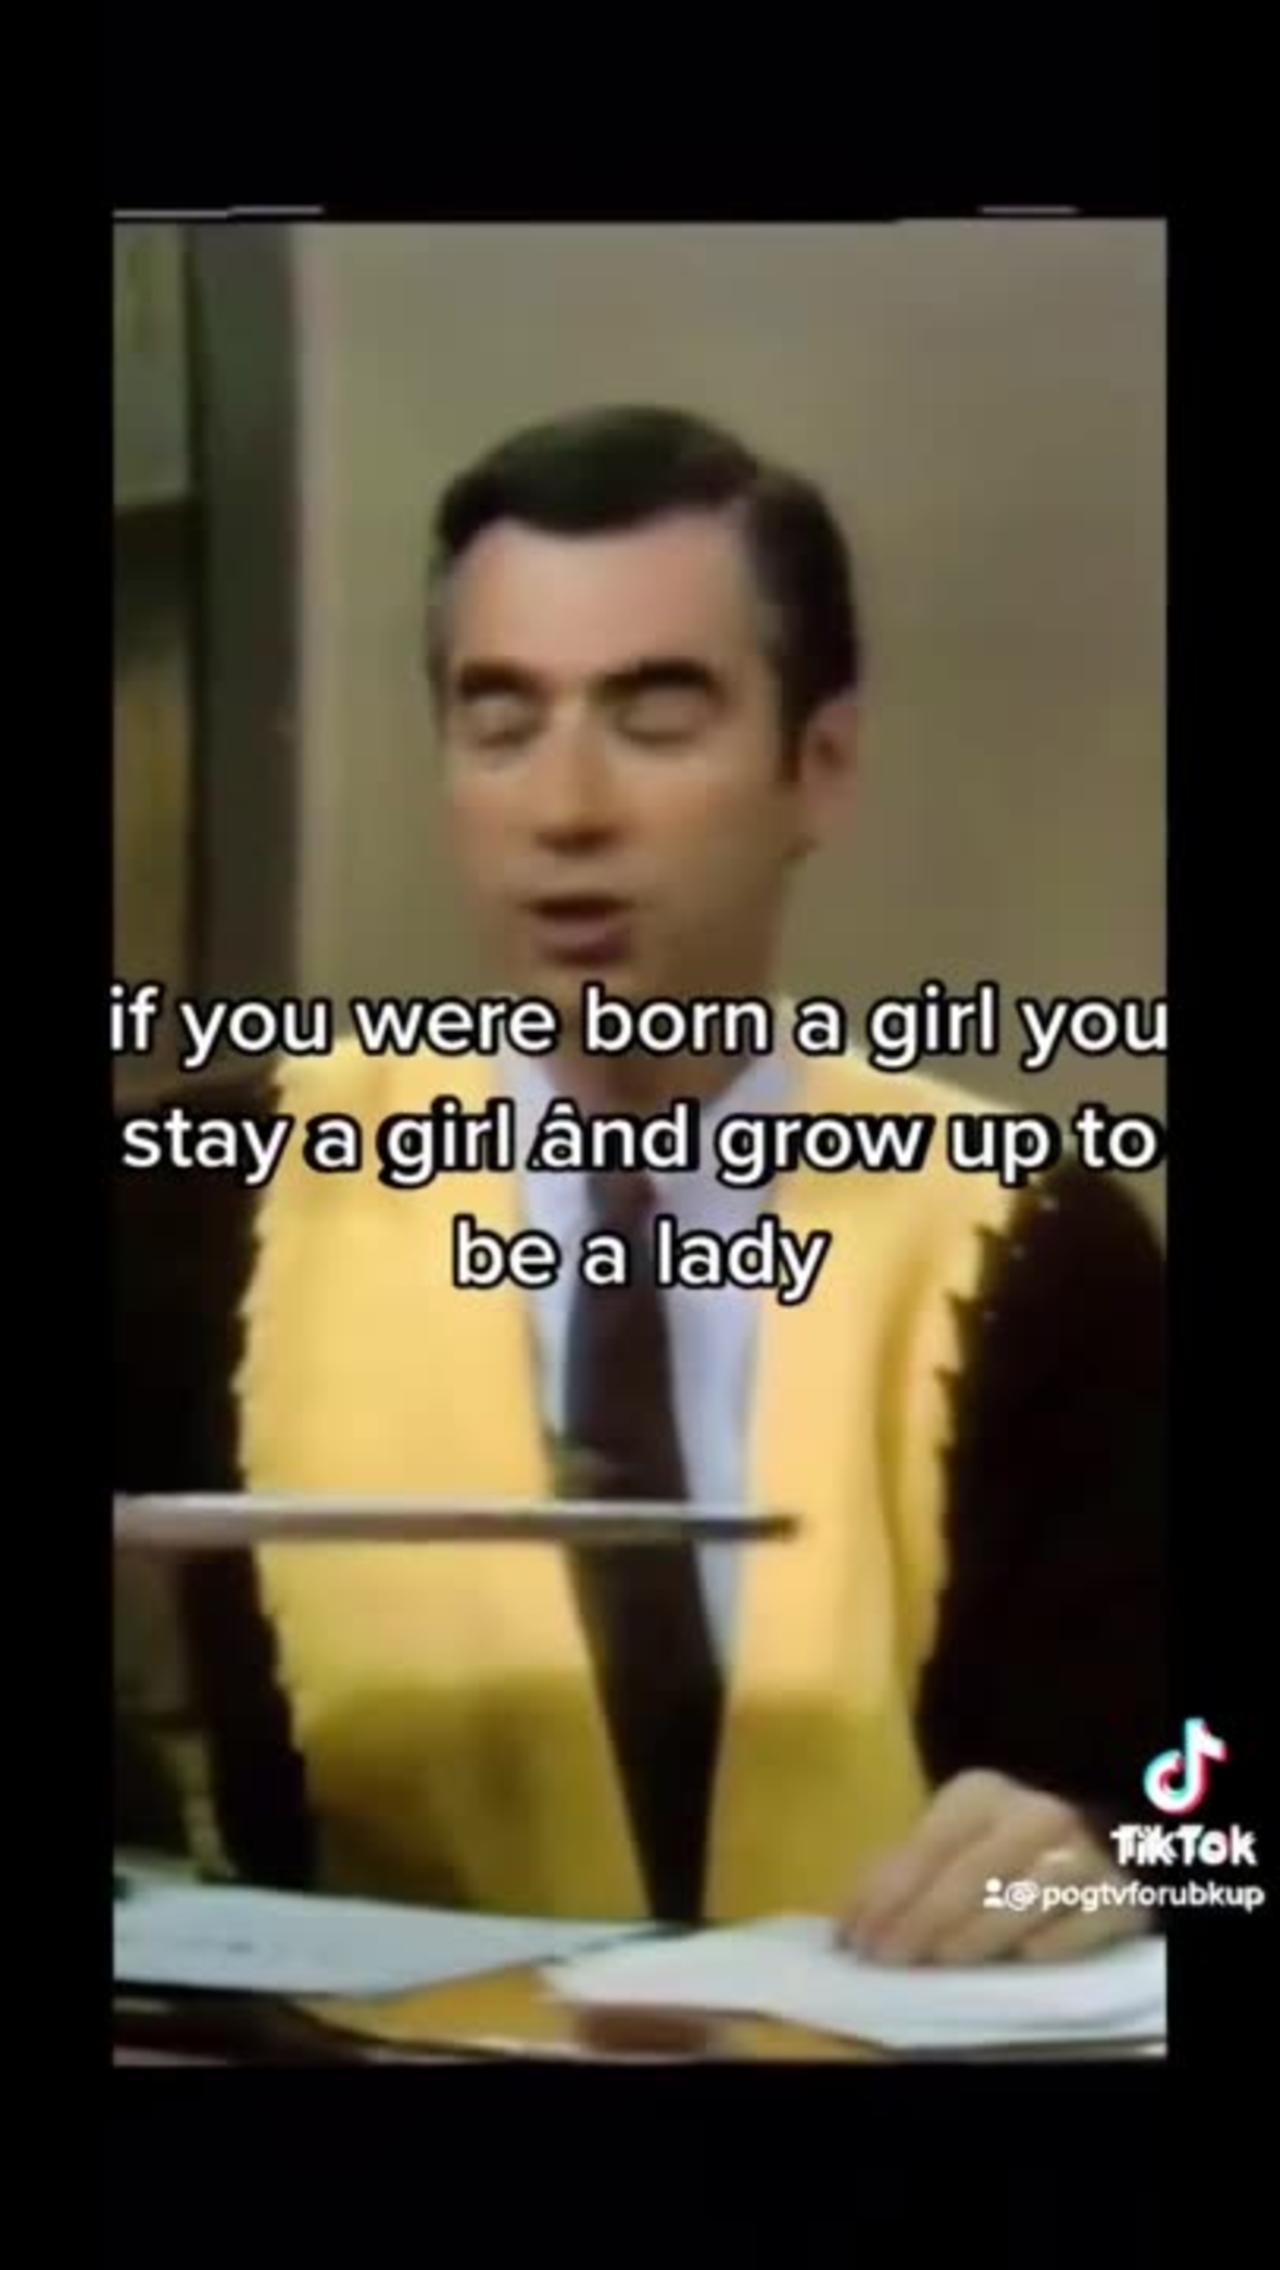 Clip Of Mister Rogers Explaining Basic Science of the Sexes is Triggering Lunatics The Left